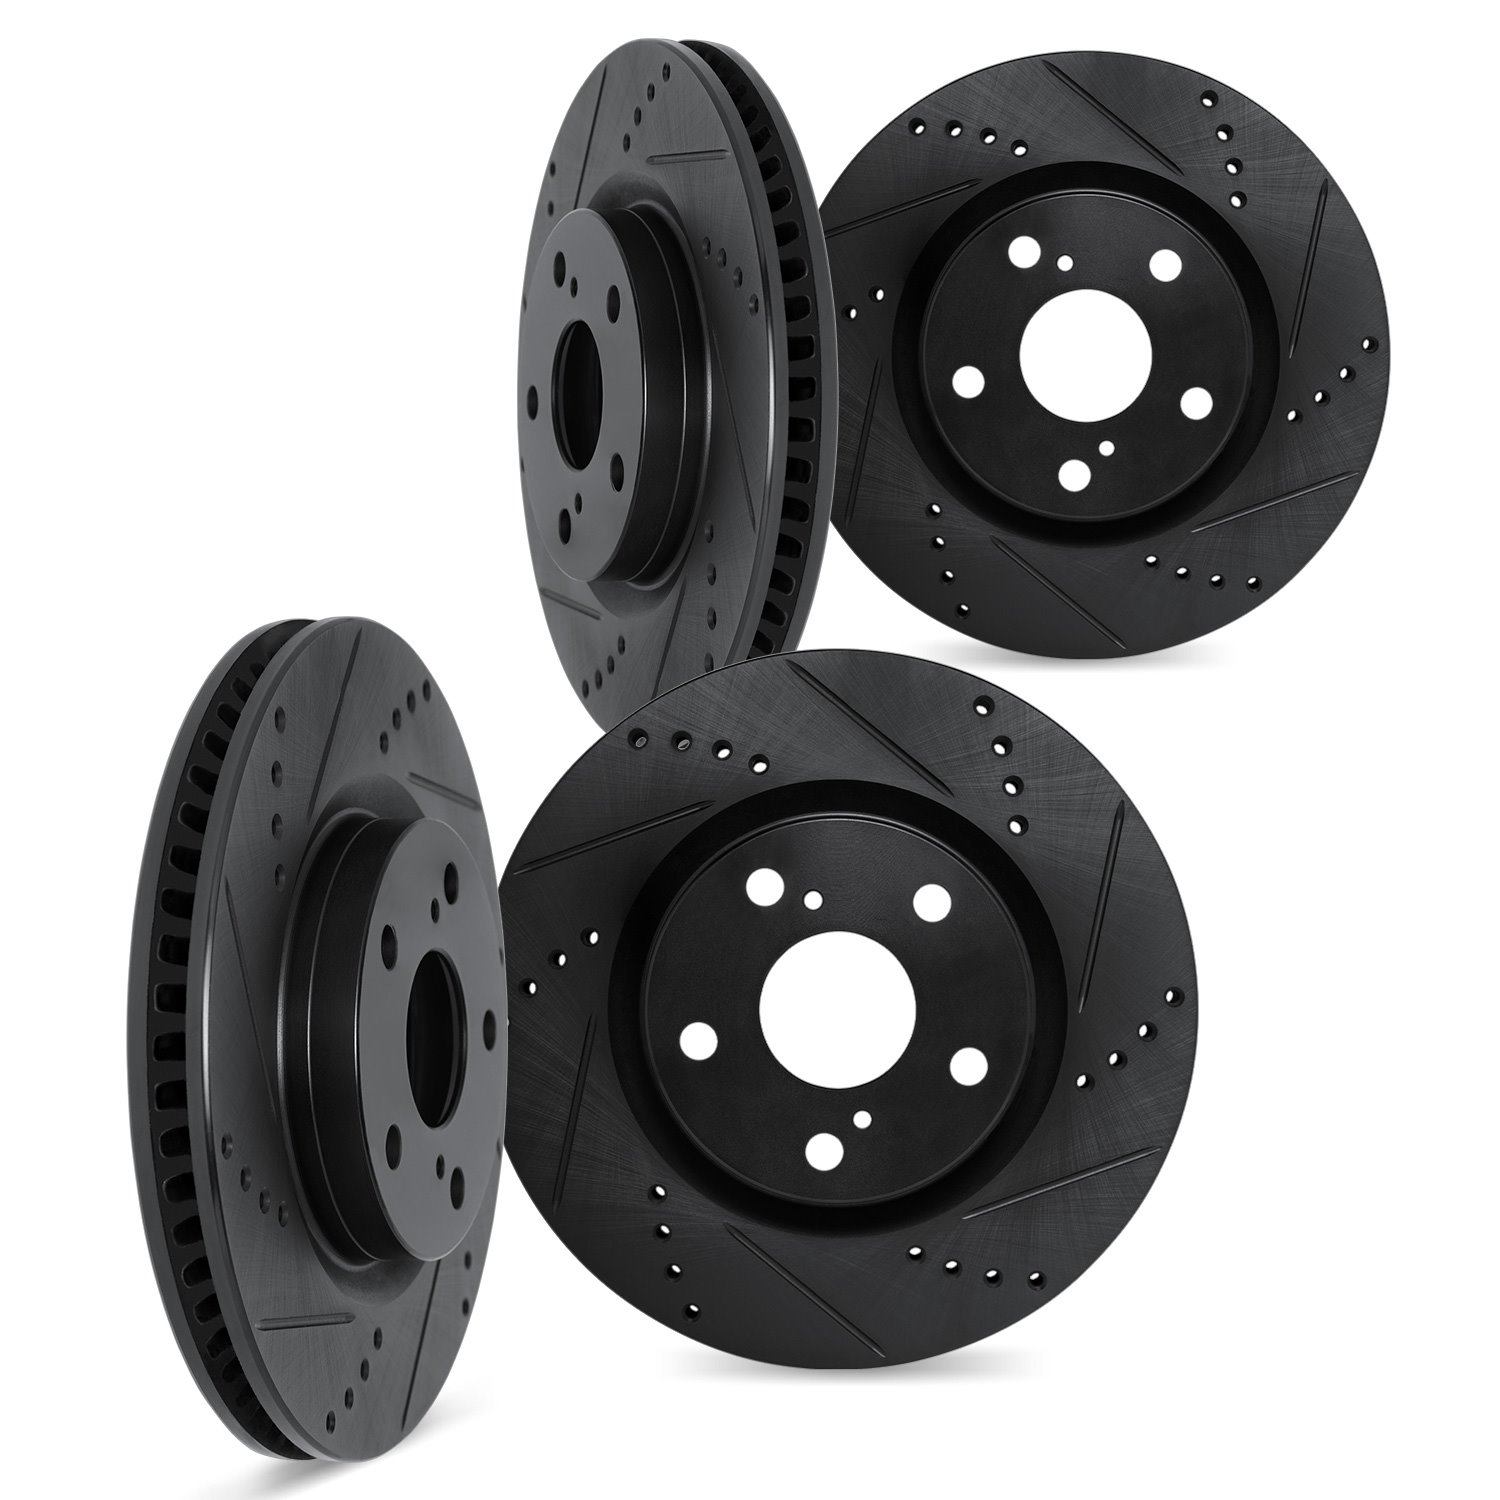 8004-75019 Drilled/Slotted Brake Rotors [Black], 1990-1990 Lexus/Toyota/Scion, Position: Front and Rear